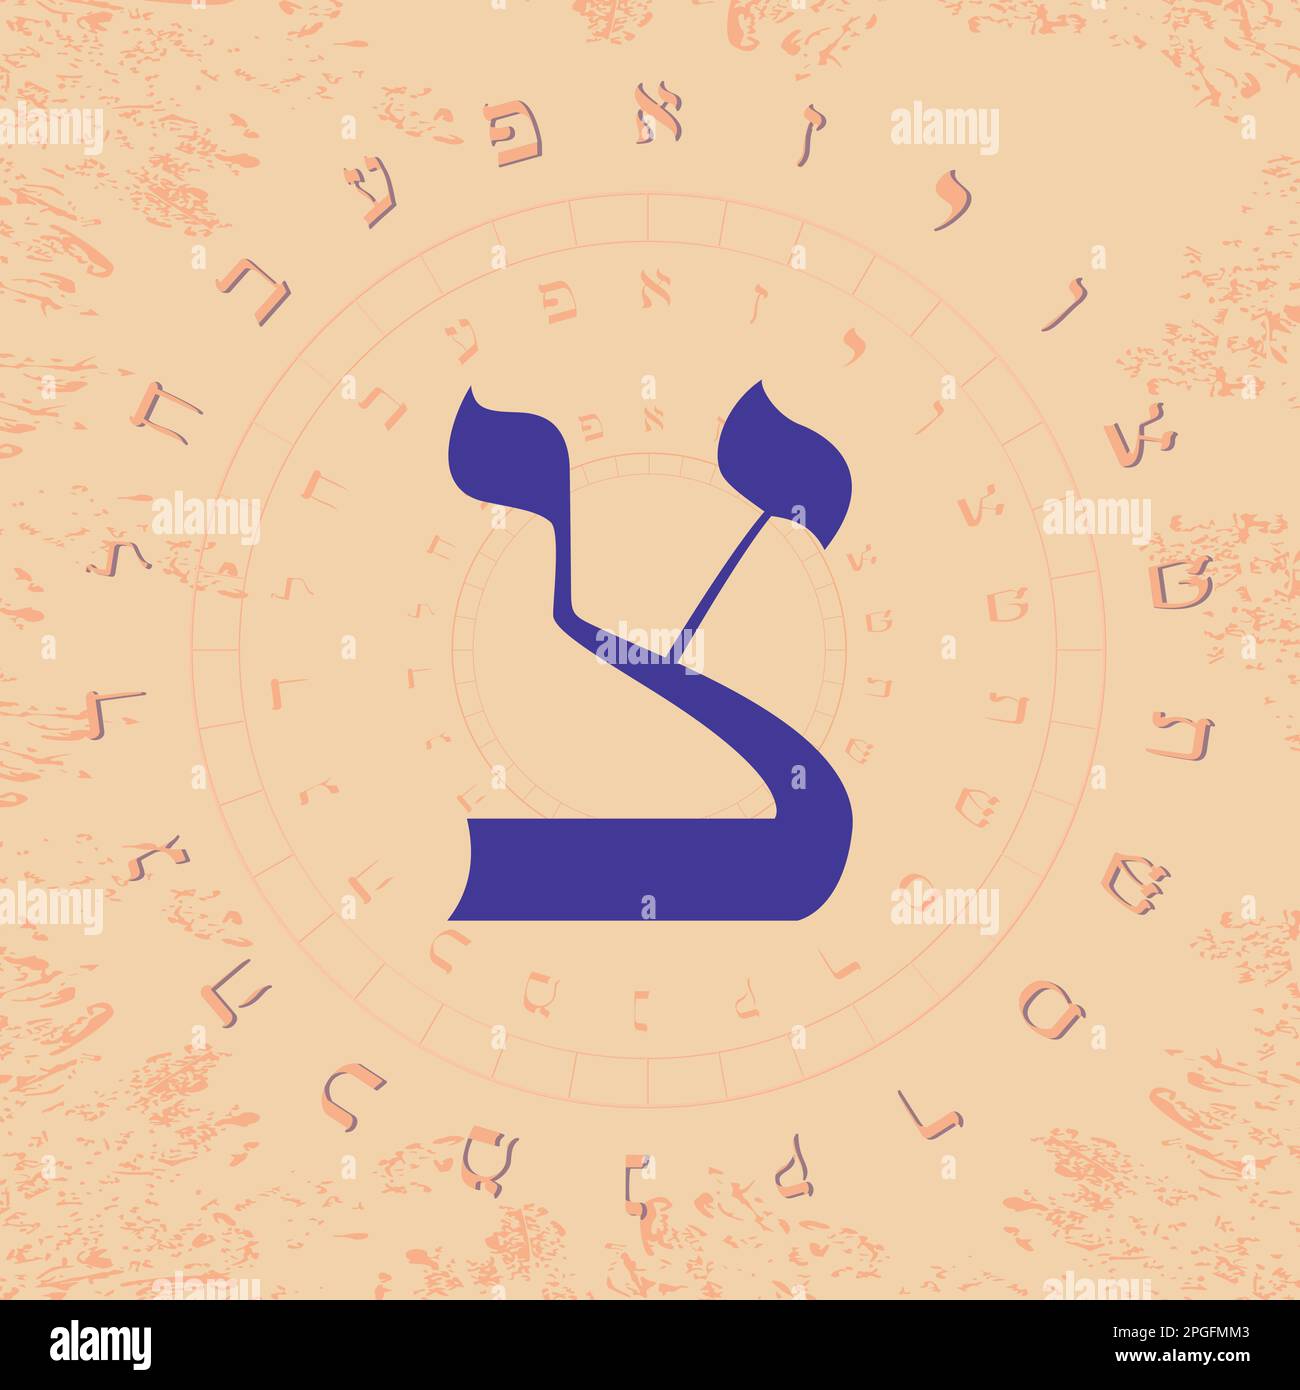 Vector illustration of the Hebrew alphabet in circular design. Hebrew letter called Shin large and blue. Stock Vector